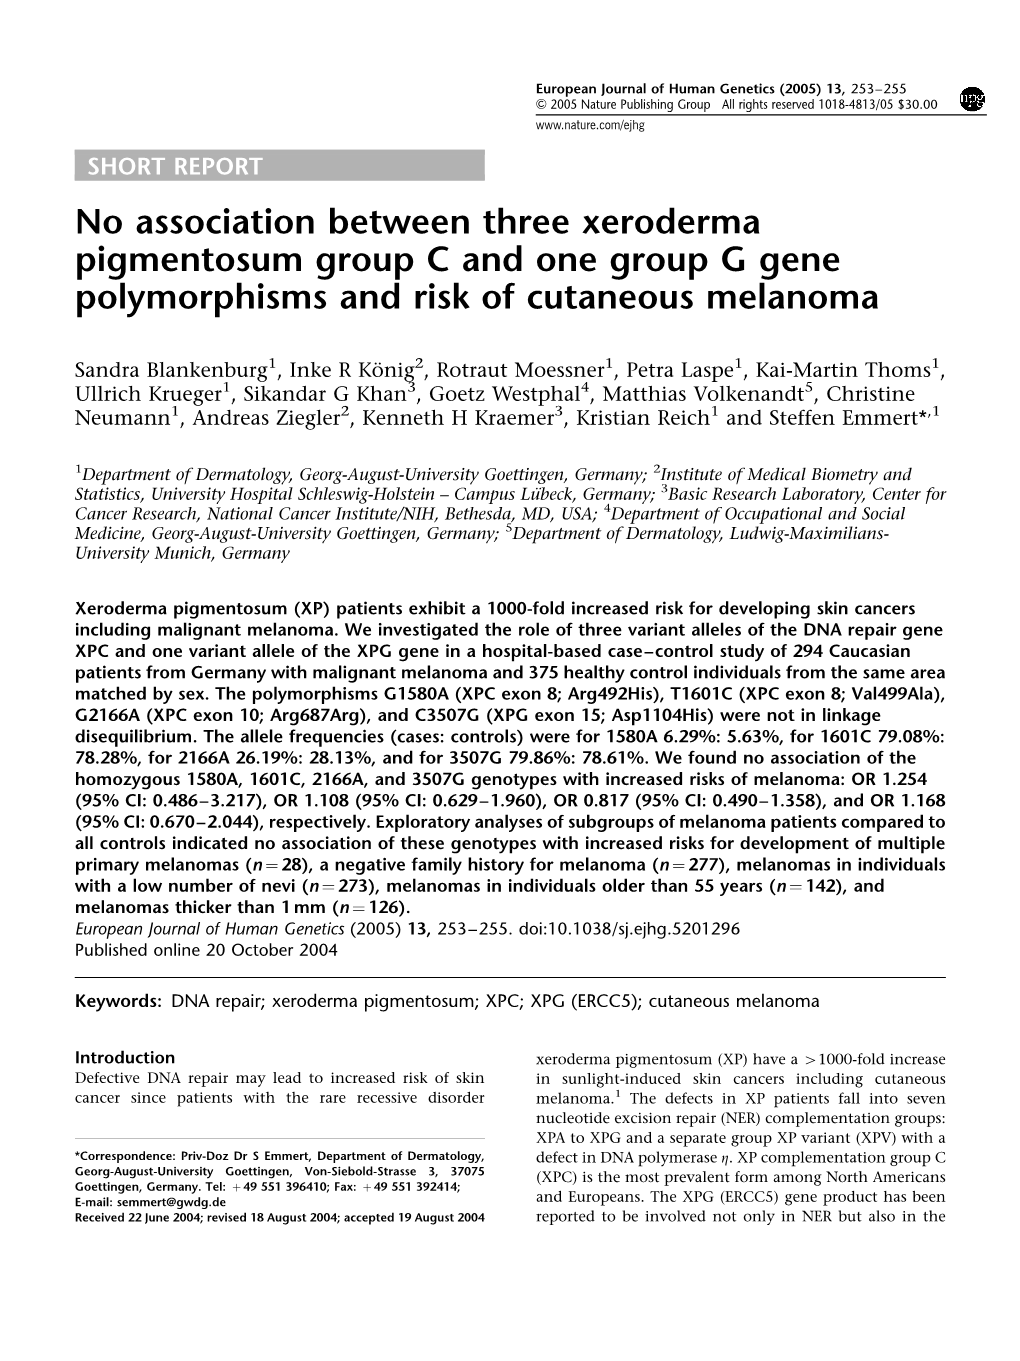 No Association Between Three Xeroderma Pigmentosum Group C and One Group G Gene Polymorphisms and Risk of Cutaneous Melanoma